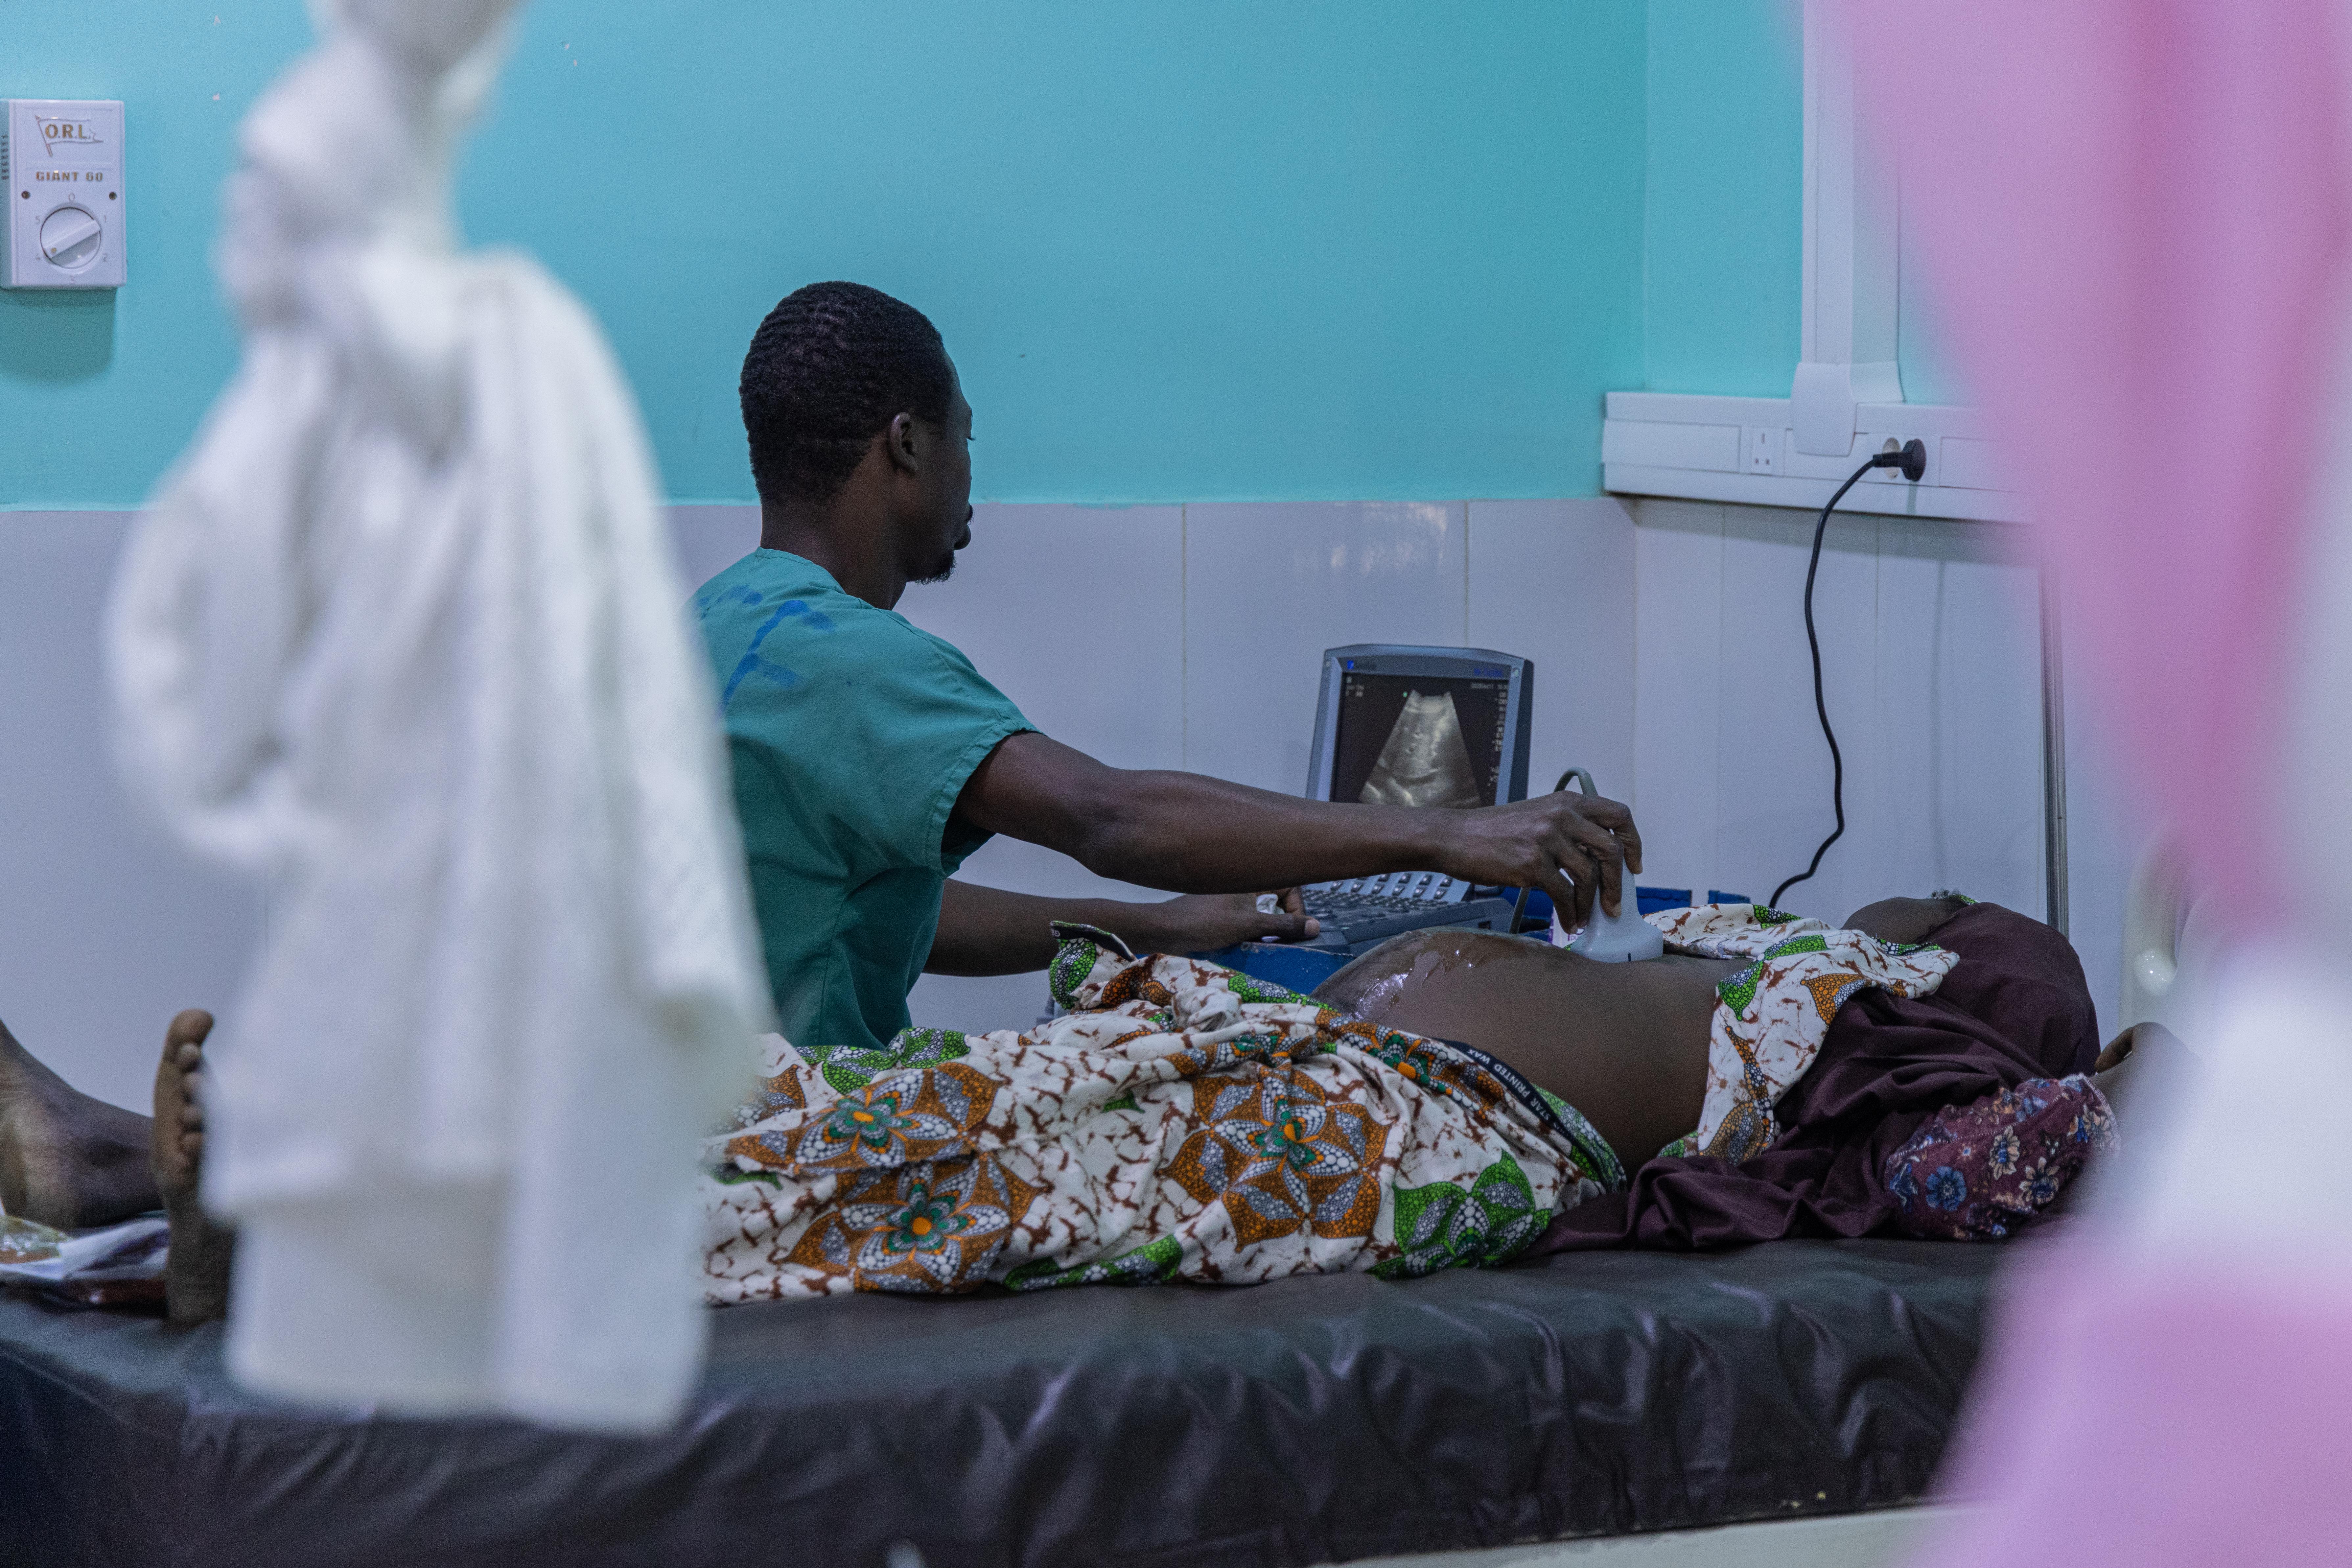 MSF doctor, Istifanus Brisca Elam conducts a scan on a pregnant woman at MSF facility in General Hospital, Jahun, Jigawa state.